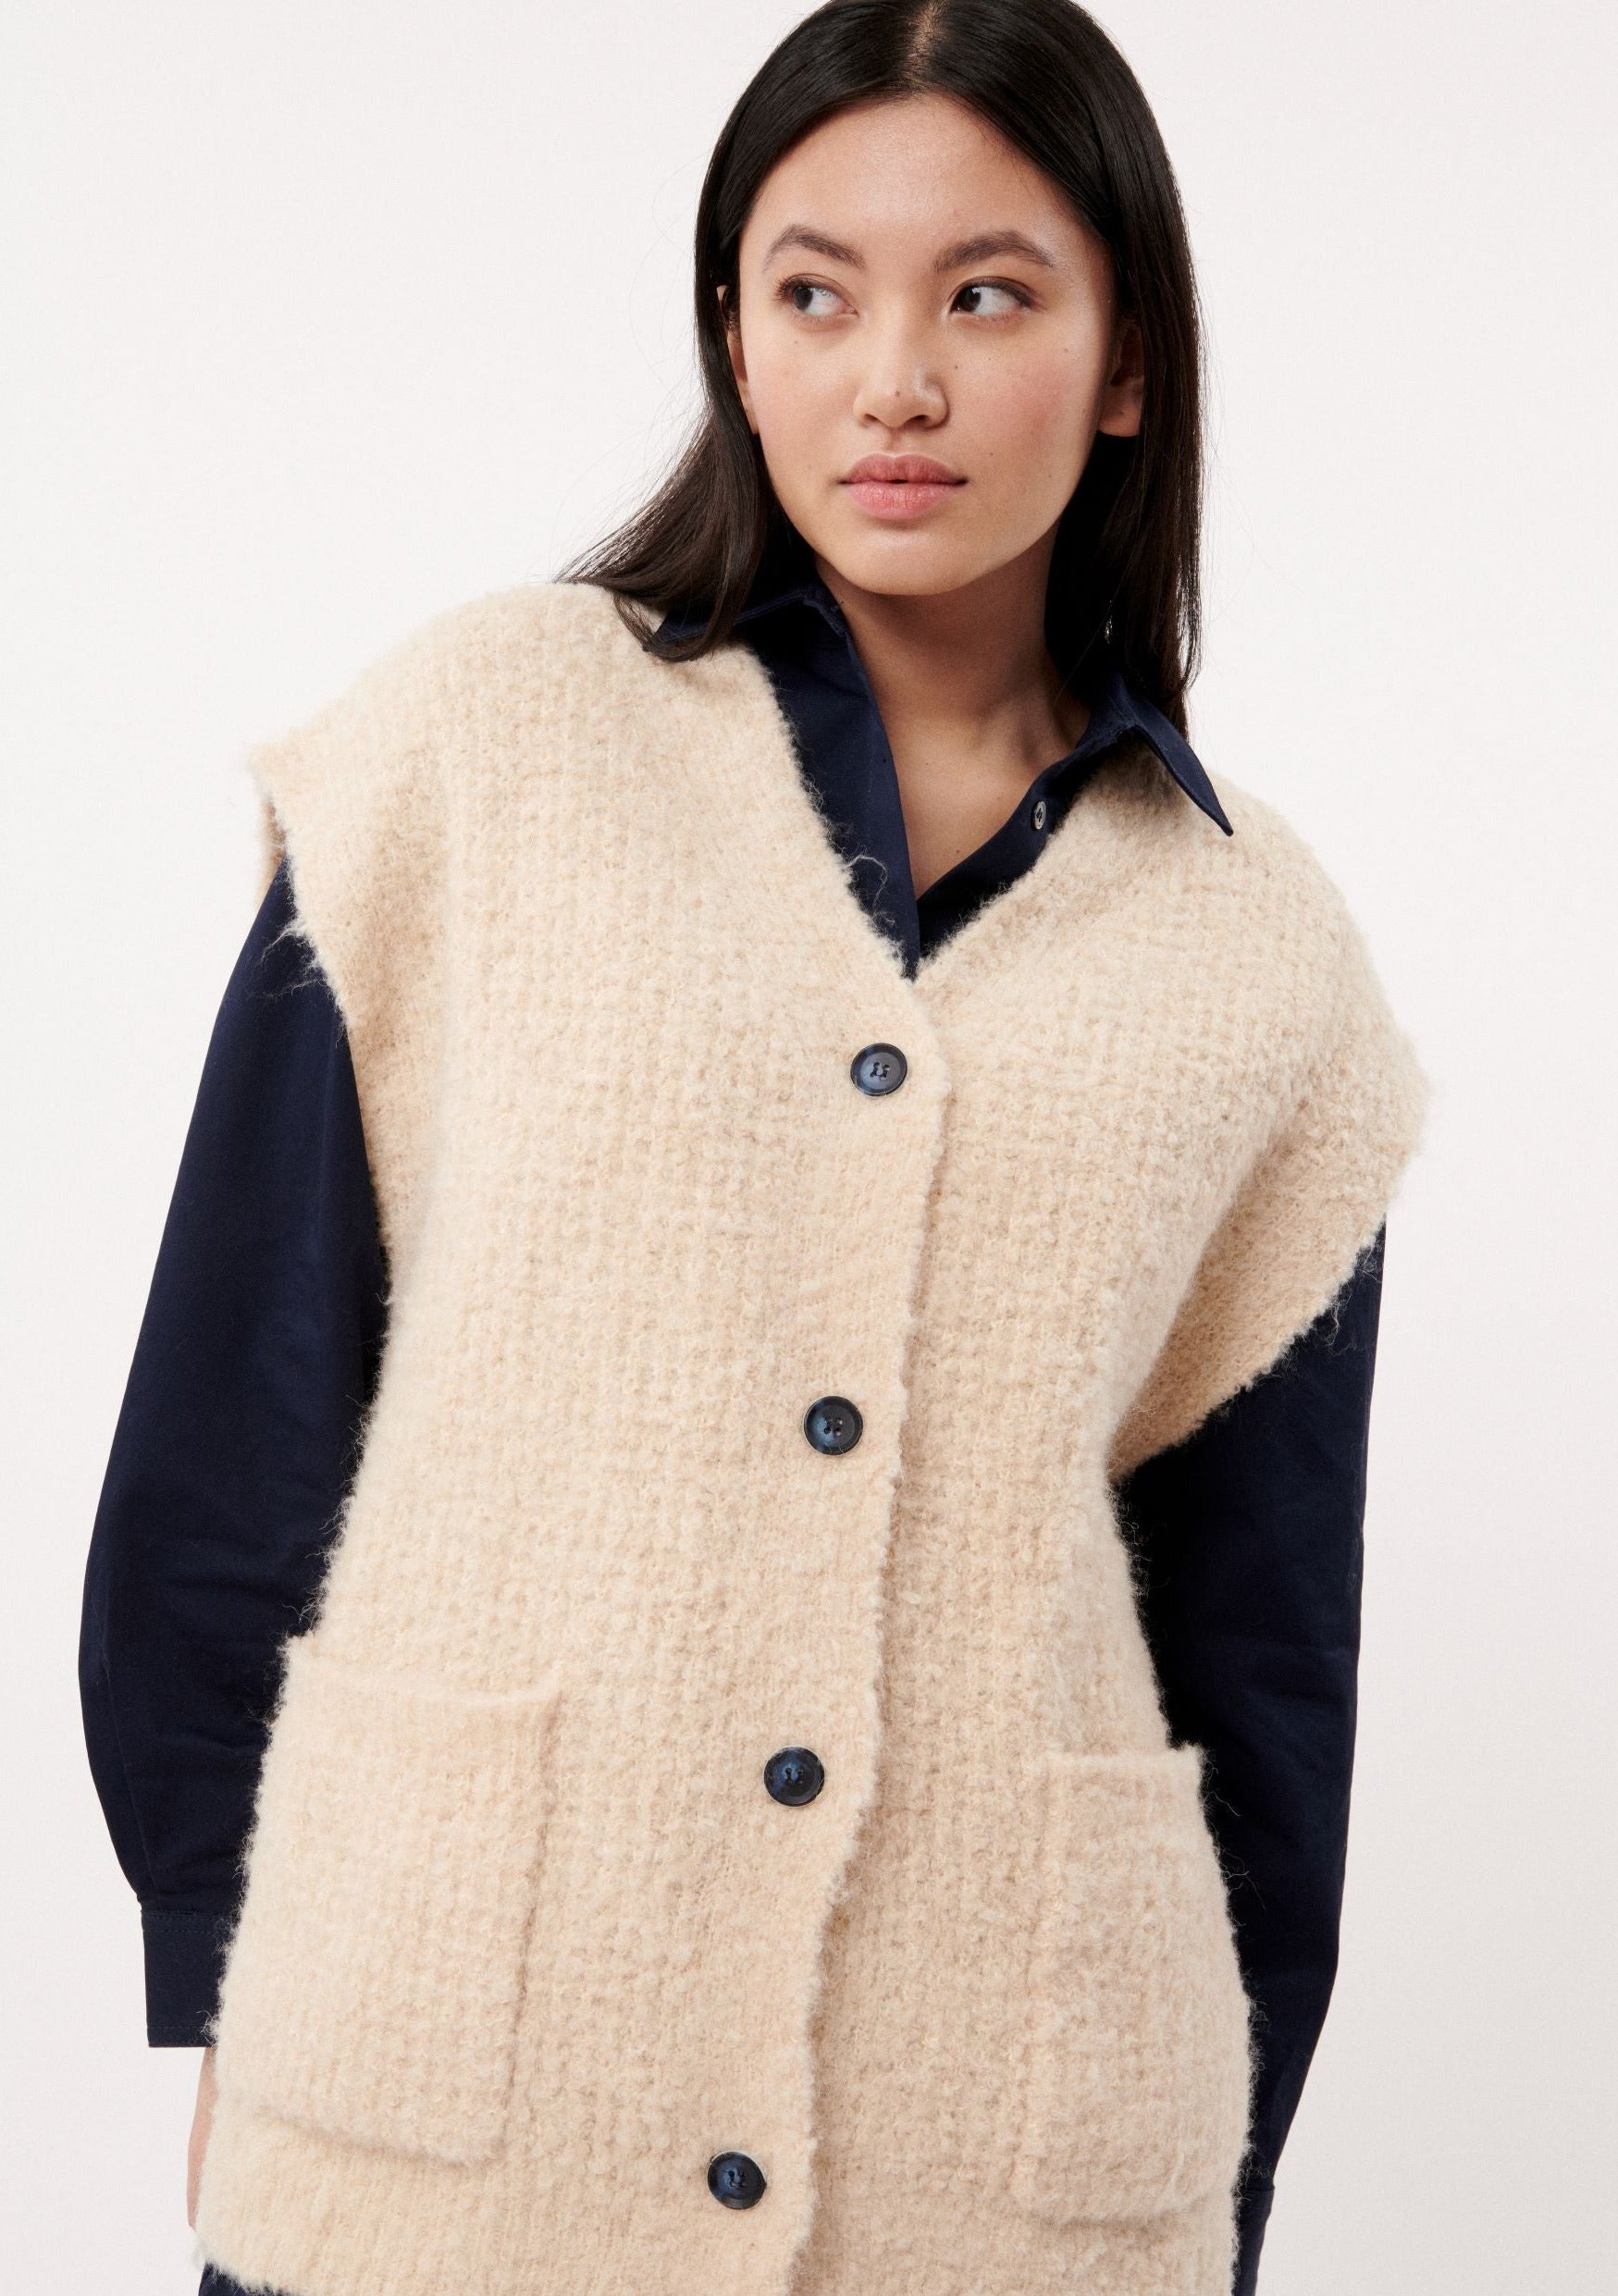 Magaly relaxed sweater-vest - Ms.Meri Mak